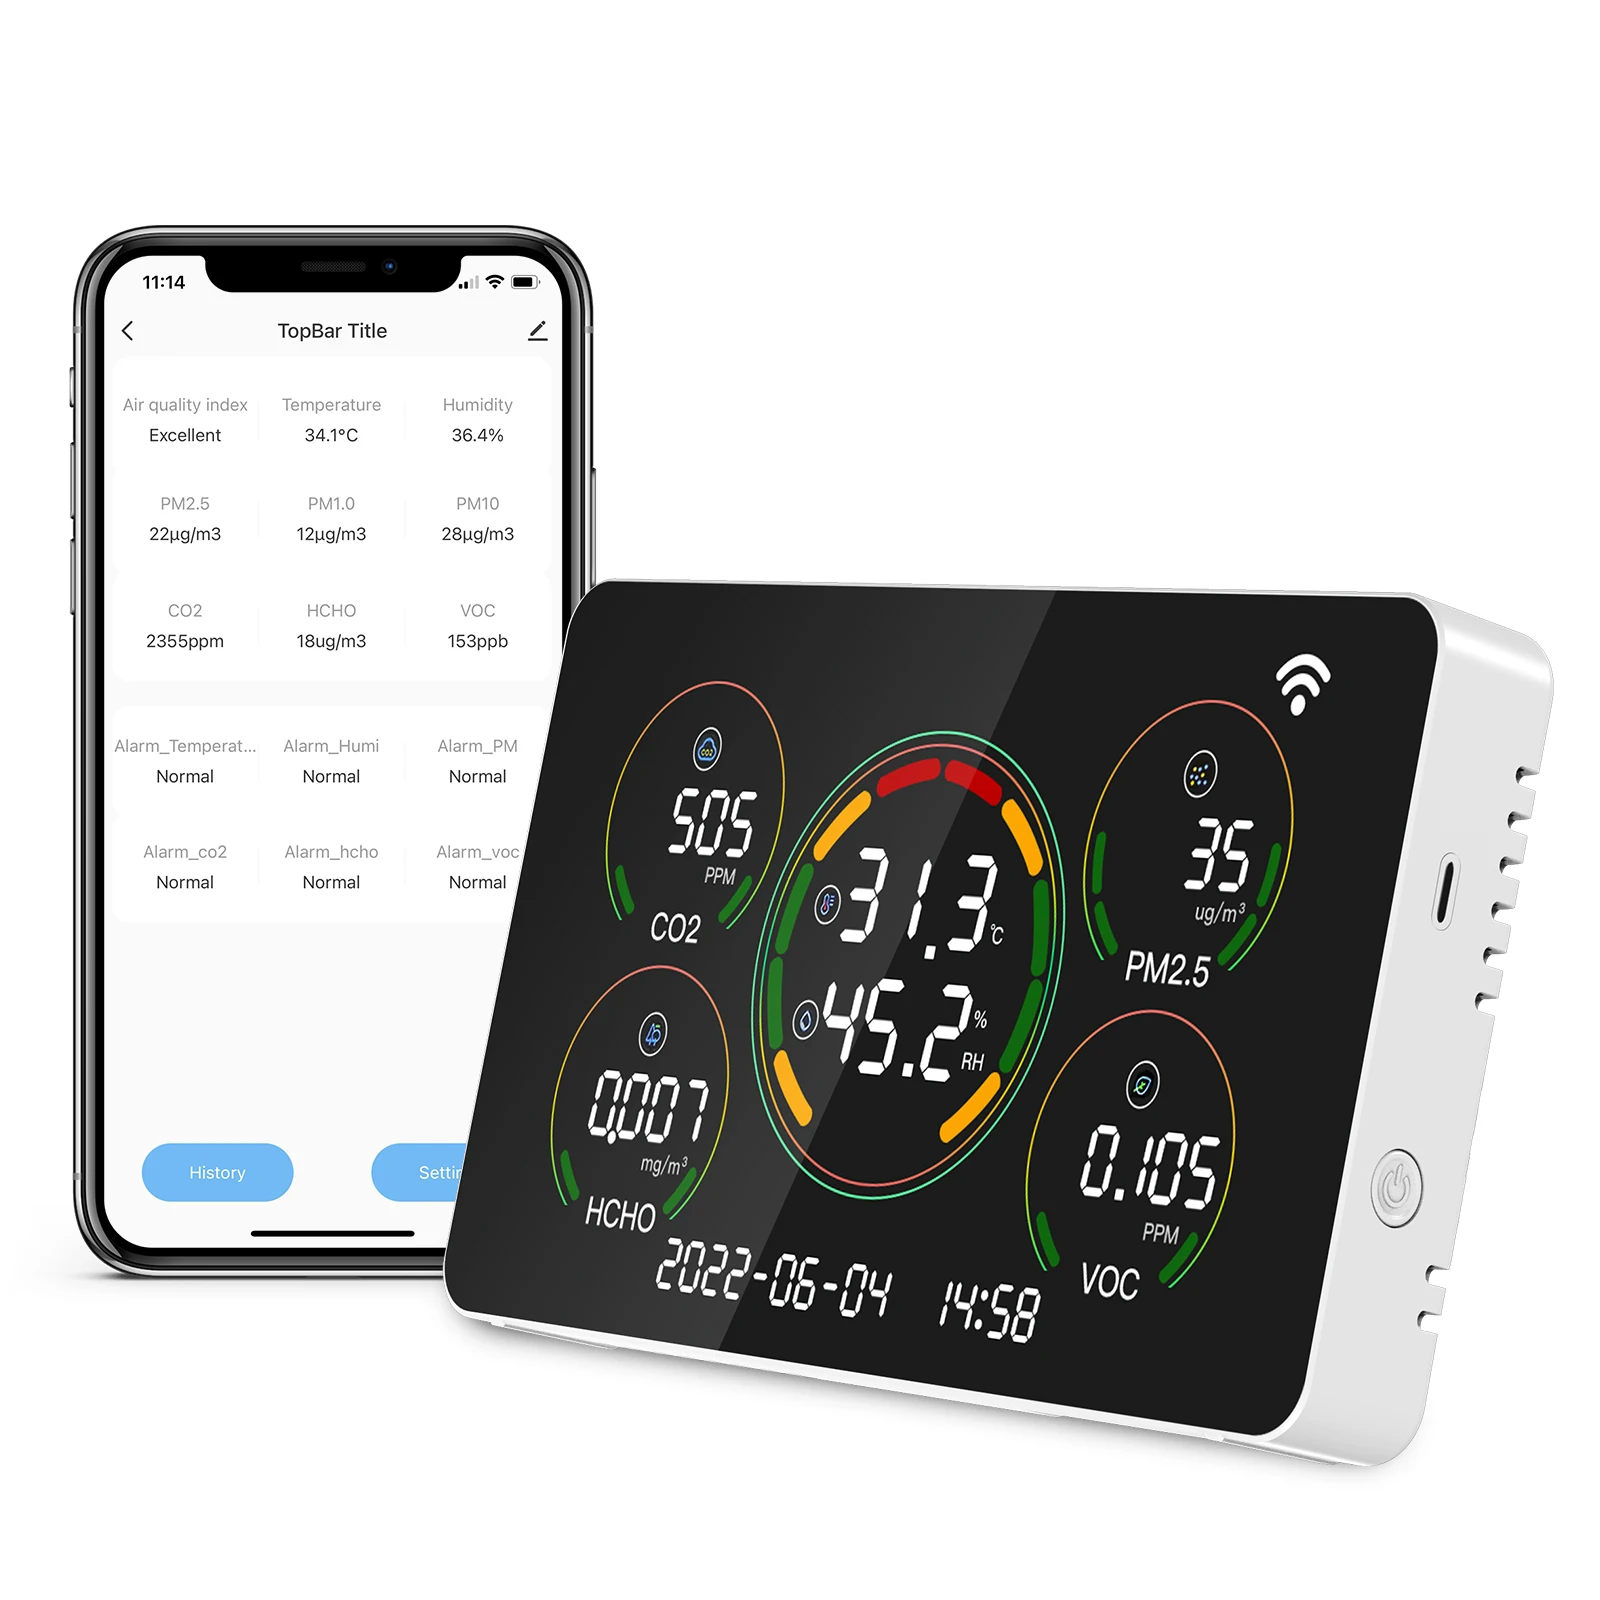 

7 in 1 Indoor Air Quality Monitor WIFI Tuya Smart Life App High Accuracy CO2 Detector Pm2.5 TVOC HCHO Tester Temp Hum Meter Real